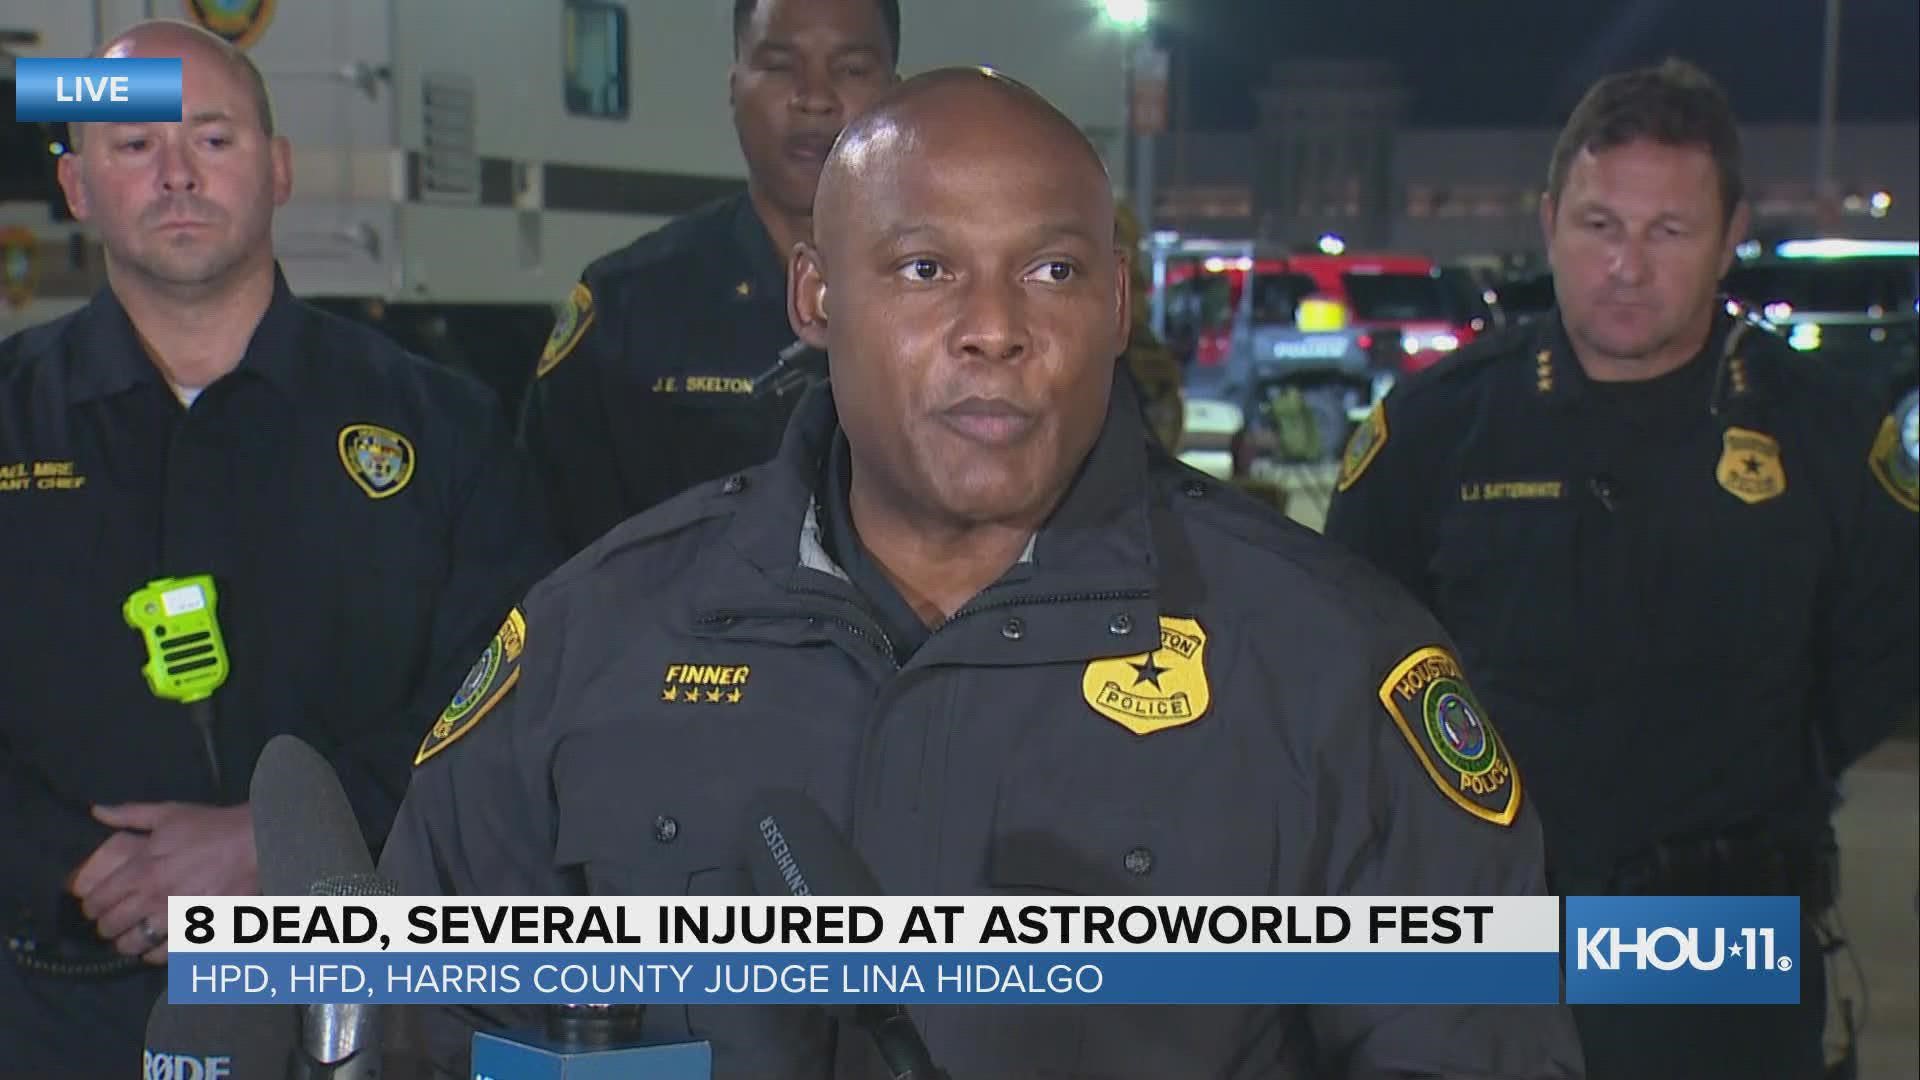 The Astroworld Festival has been canceled for Saturday after eight people died and several people were hospitalized during the first night.